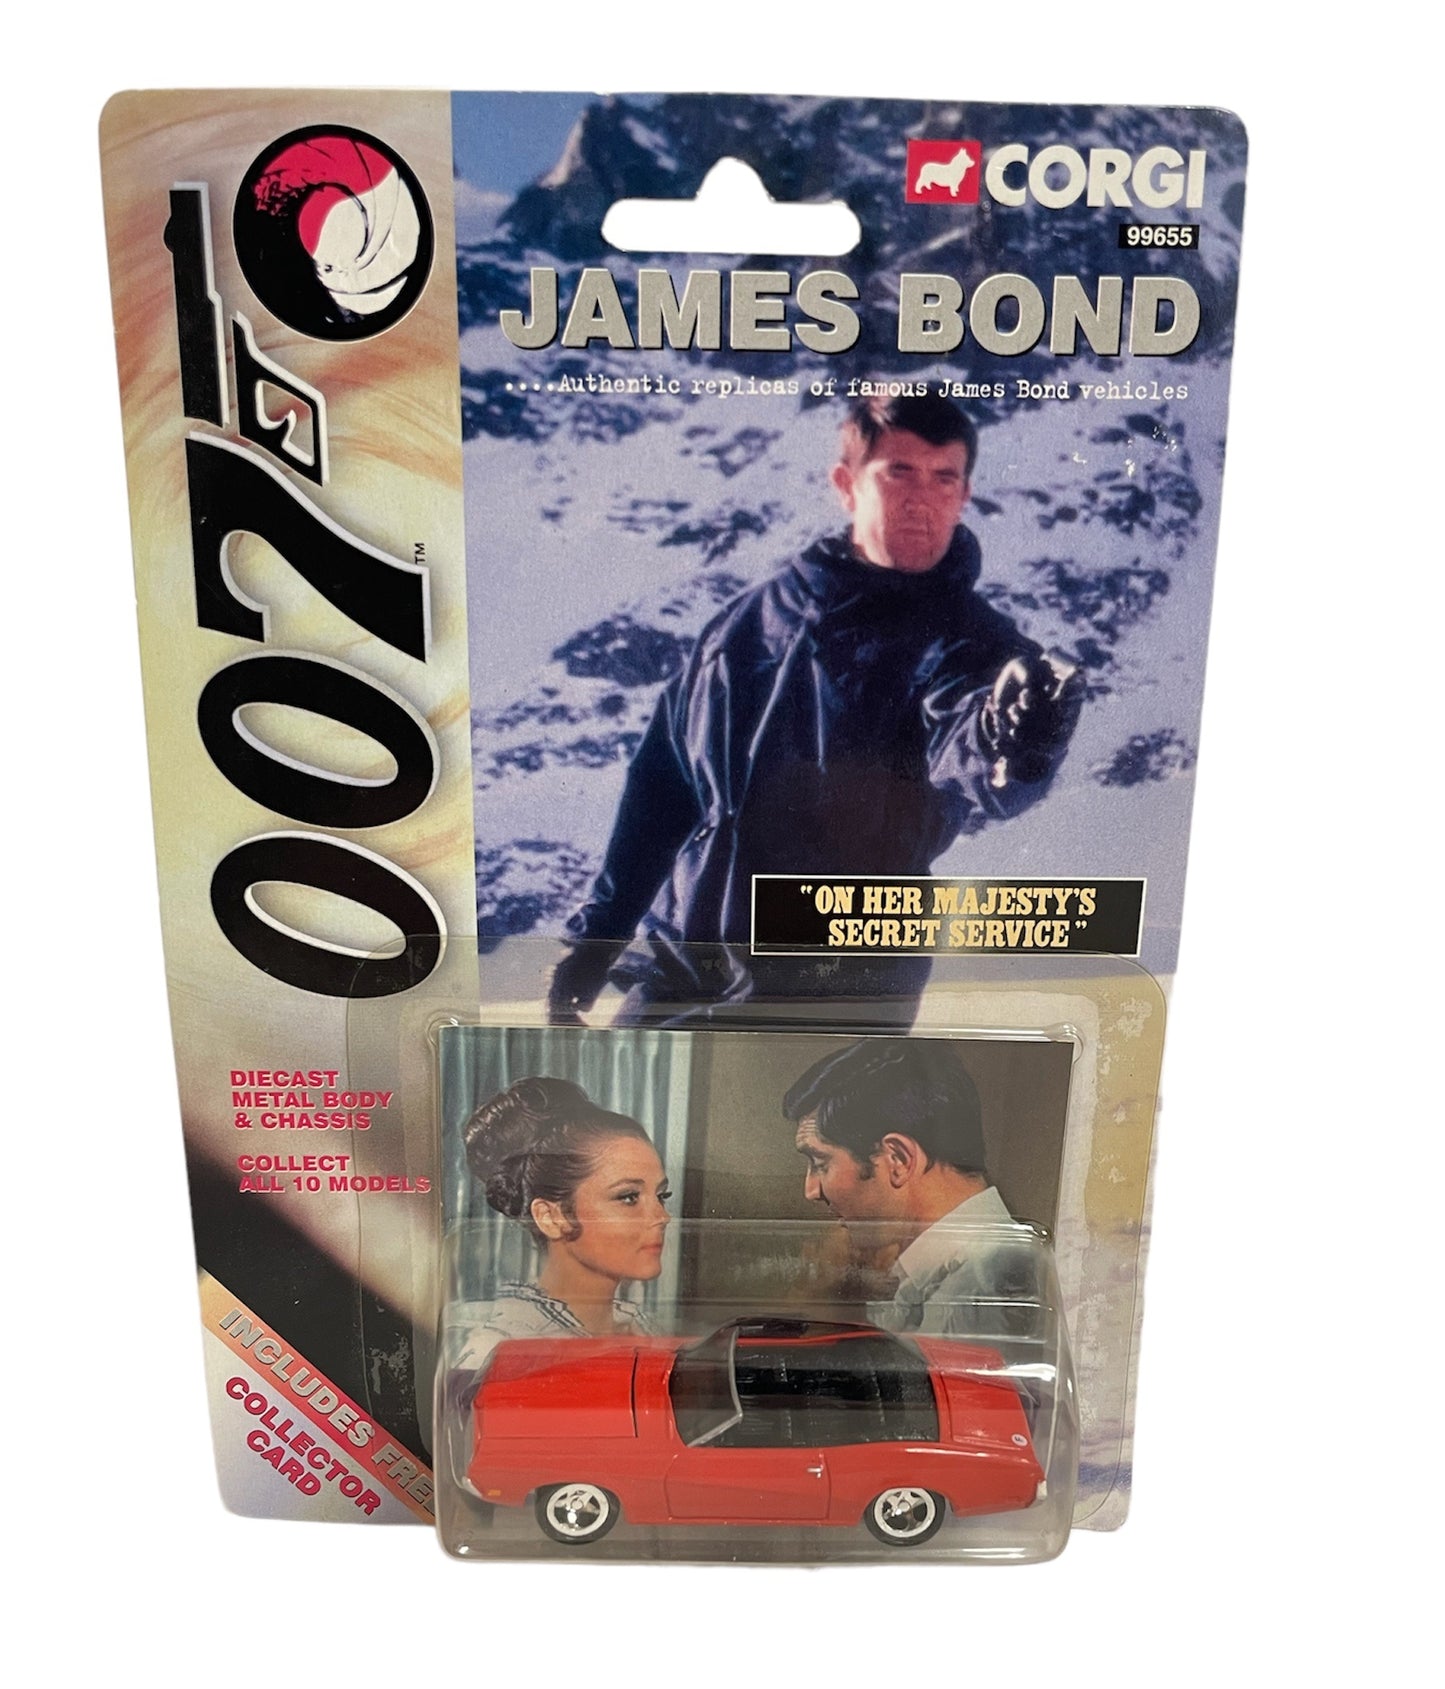 Vintage 1999 Corgi James Bond 007 - On Her Majestys Secret Service - Mercury Cougar XR7 Convertible 1:65 Scale Die-Cast Vehicle Replica Number 99655 - Includes Free Collectors Card - Brand New Factory Sealed Shop Stock Room Find